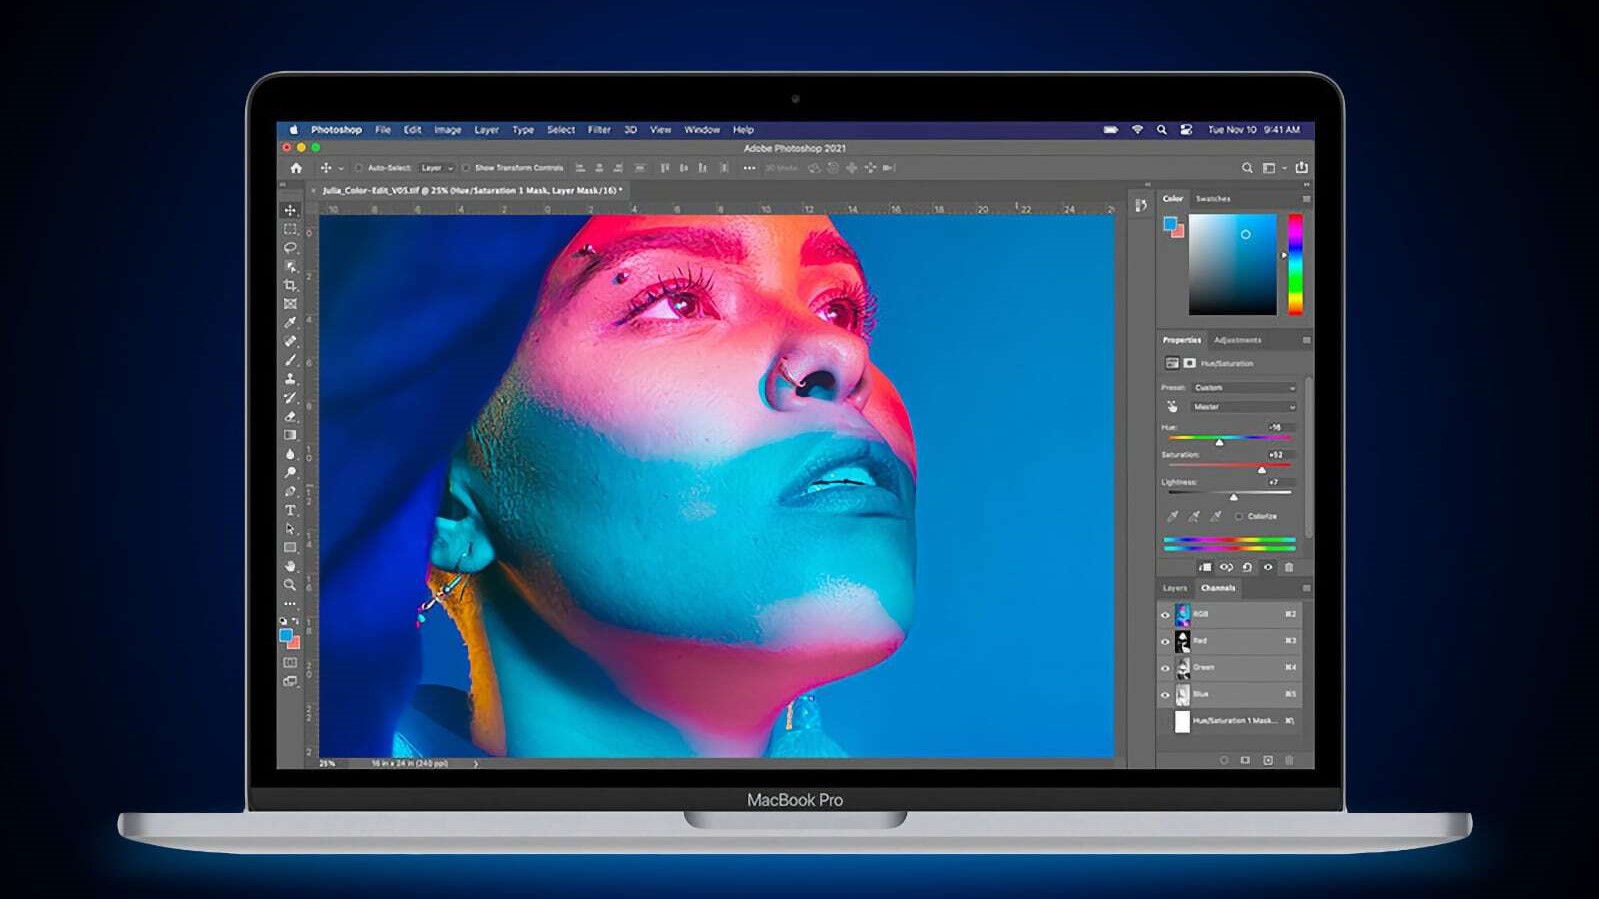 Get Adobe Creative Cloud Photography for less